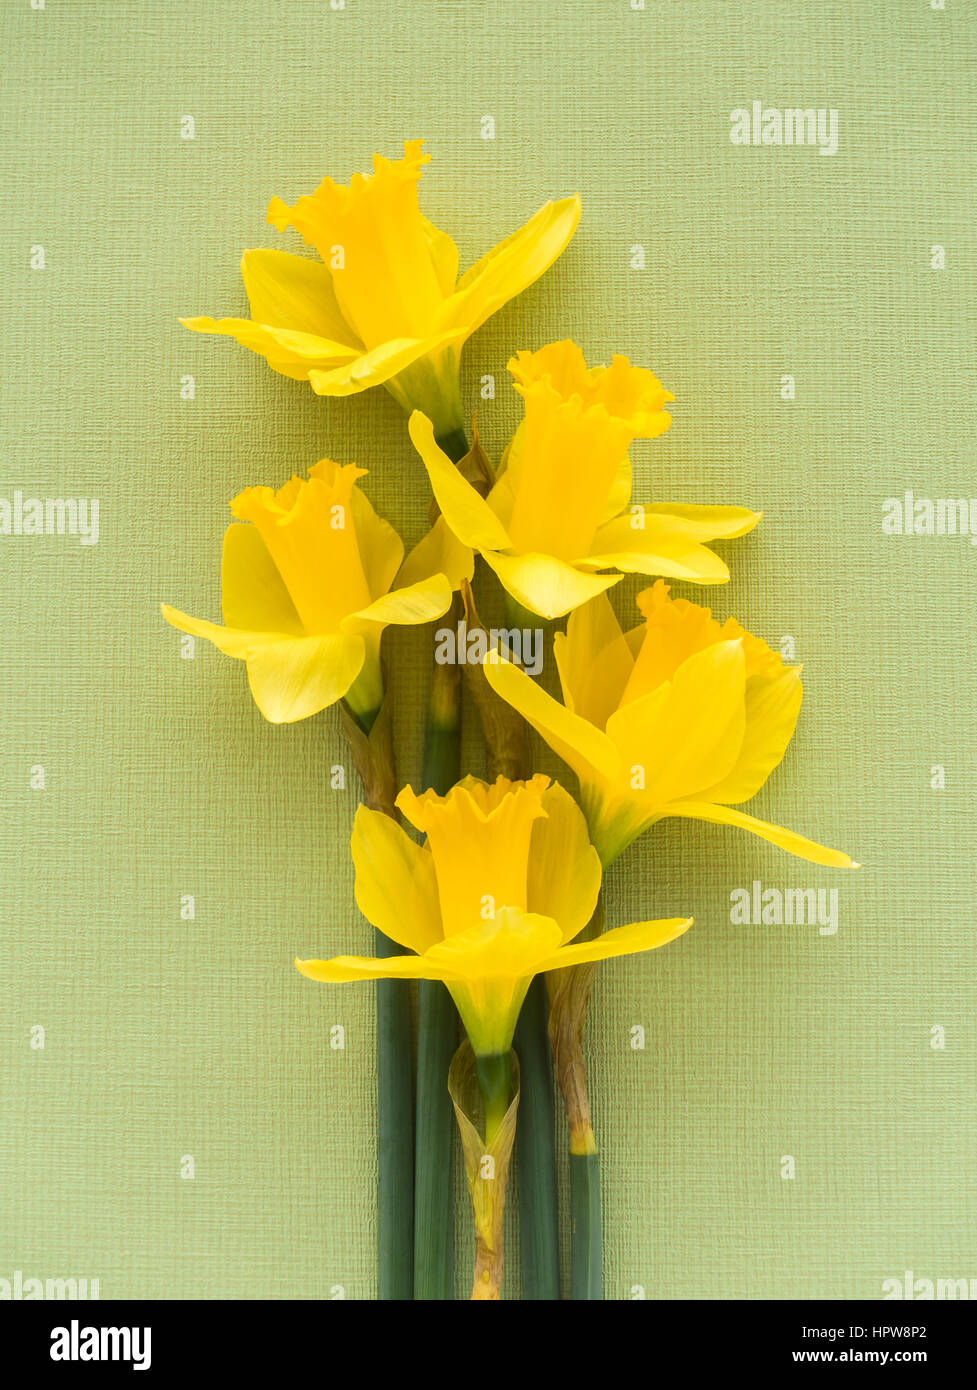 Closeup of five fresh yellow Jersey Pride daffodils lying on soft pale green textured background. Stock Photo